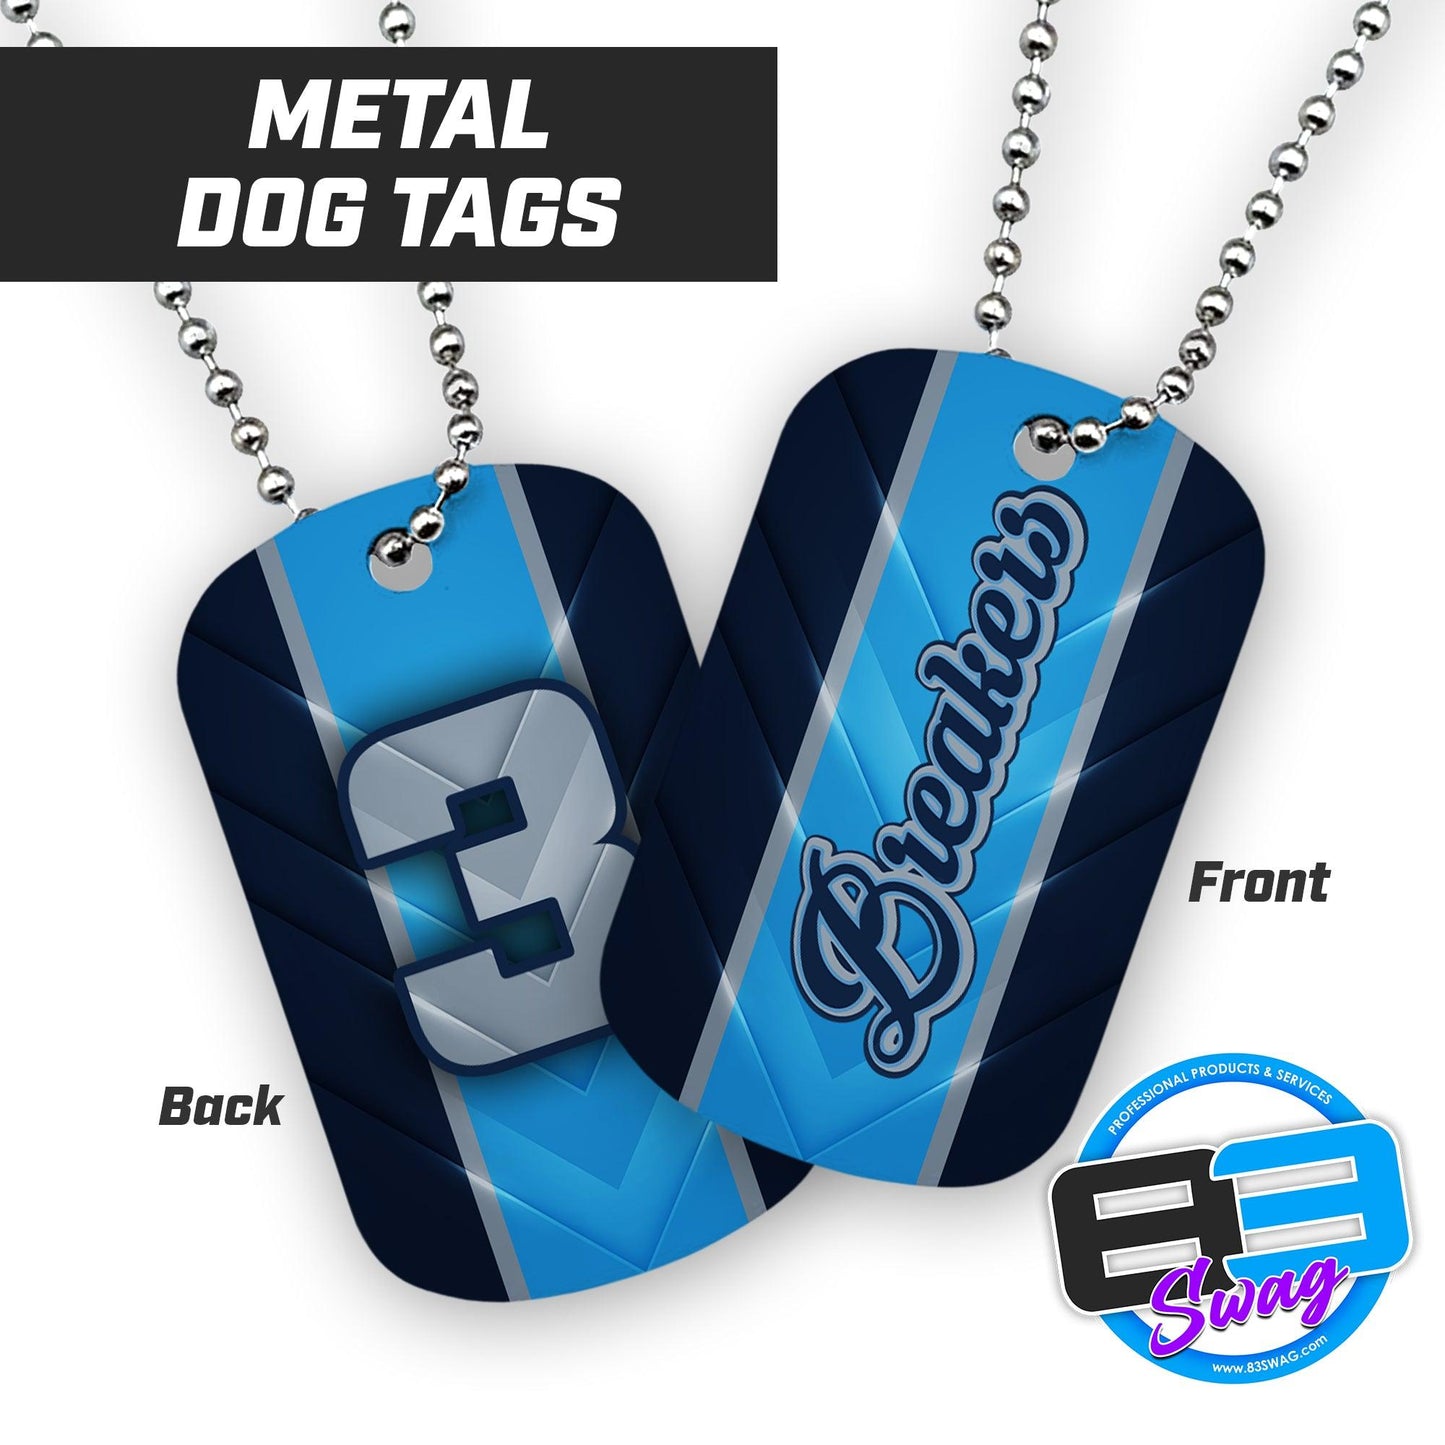 Breakers - Double Sided Dog Tags - Includes Chain